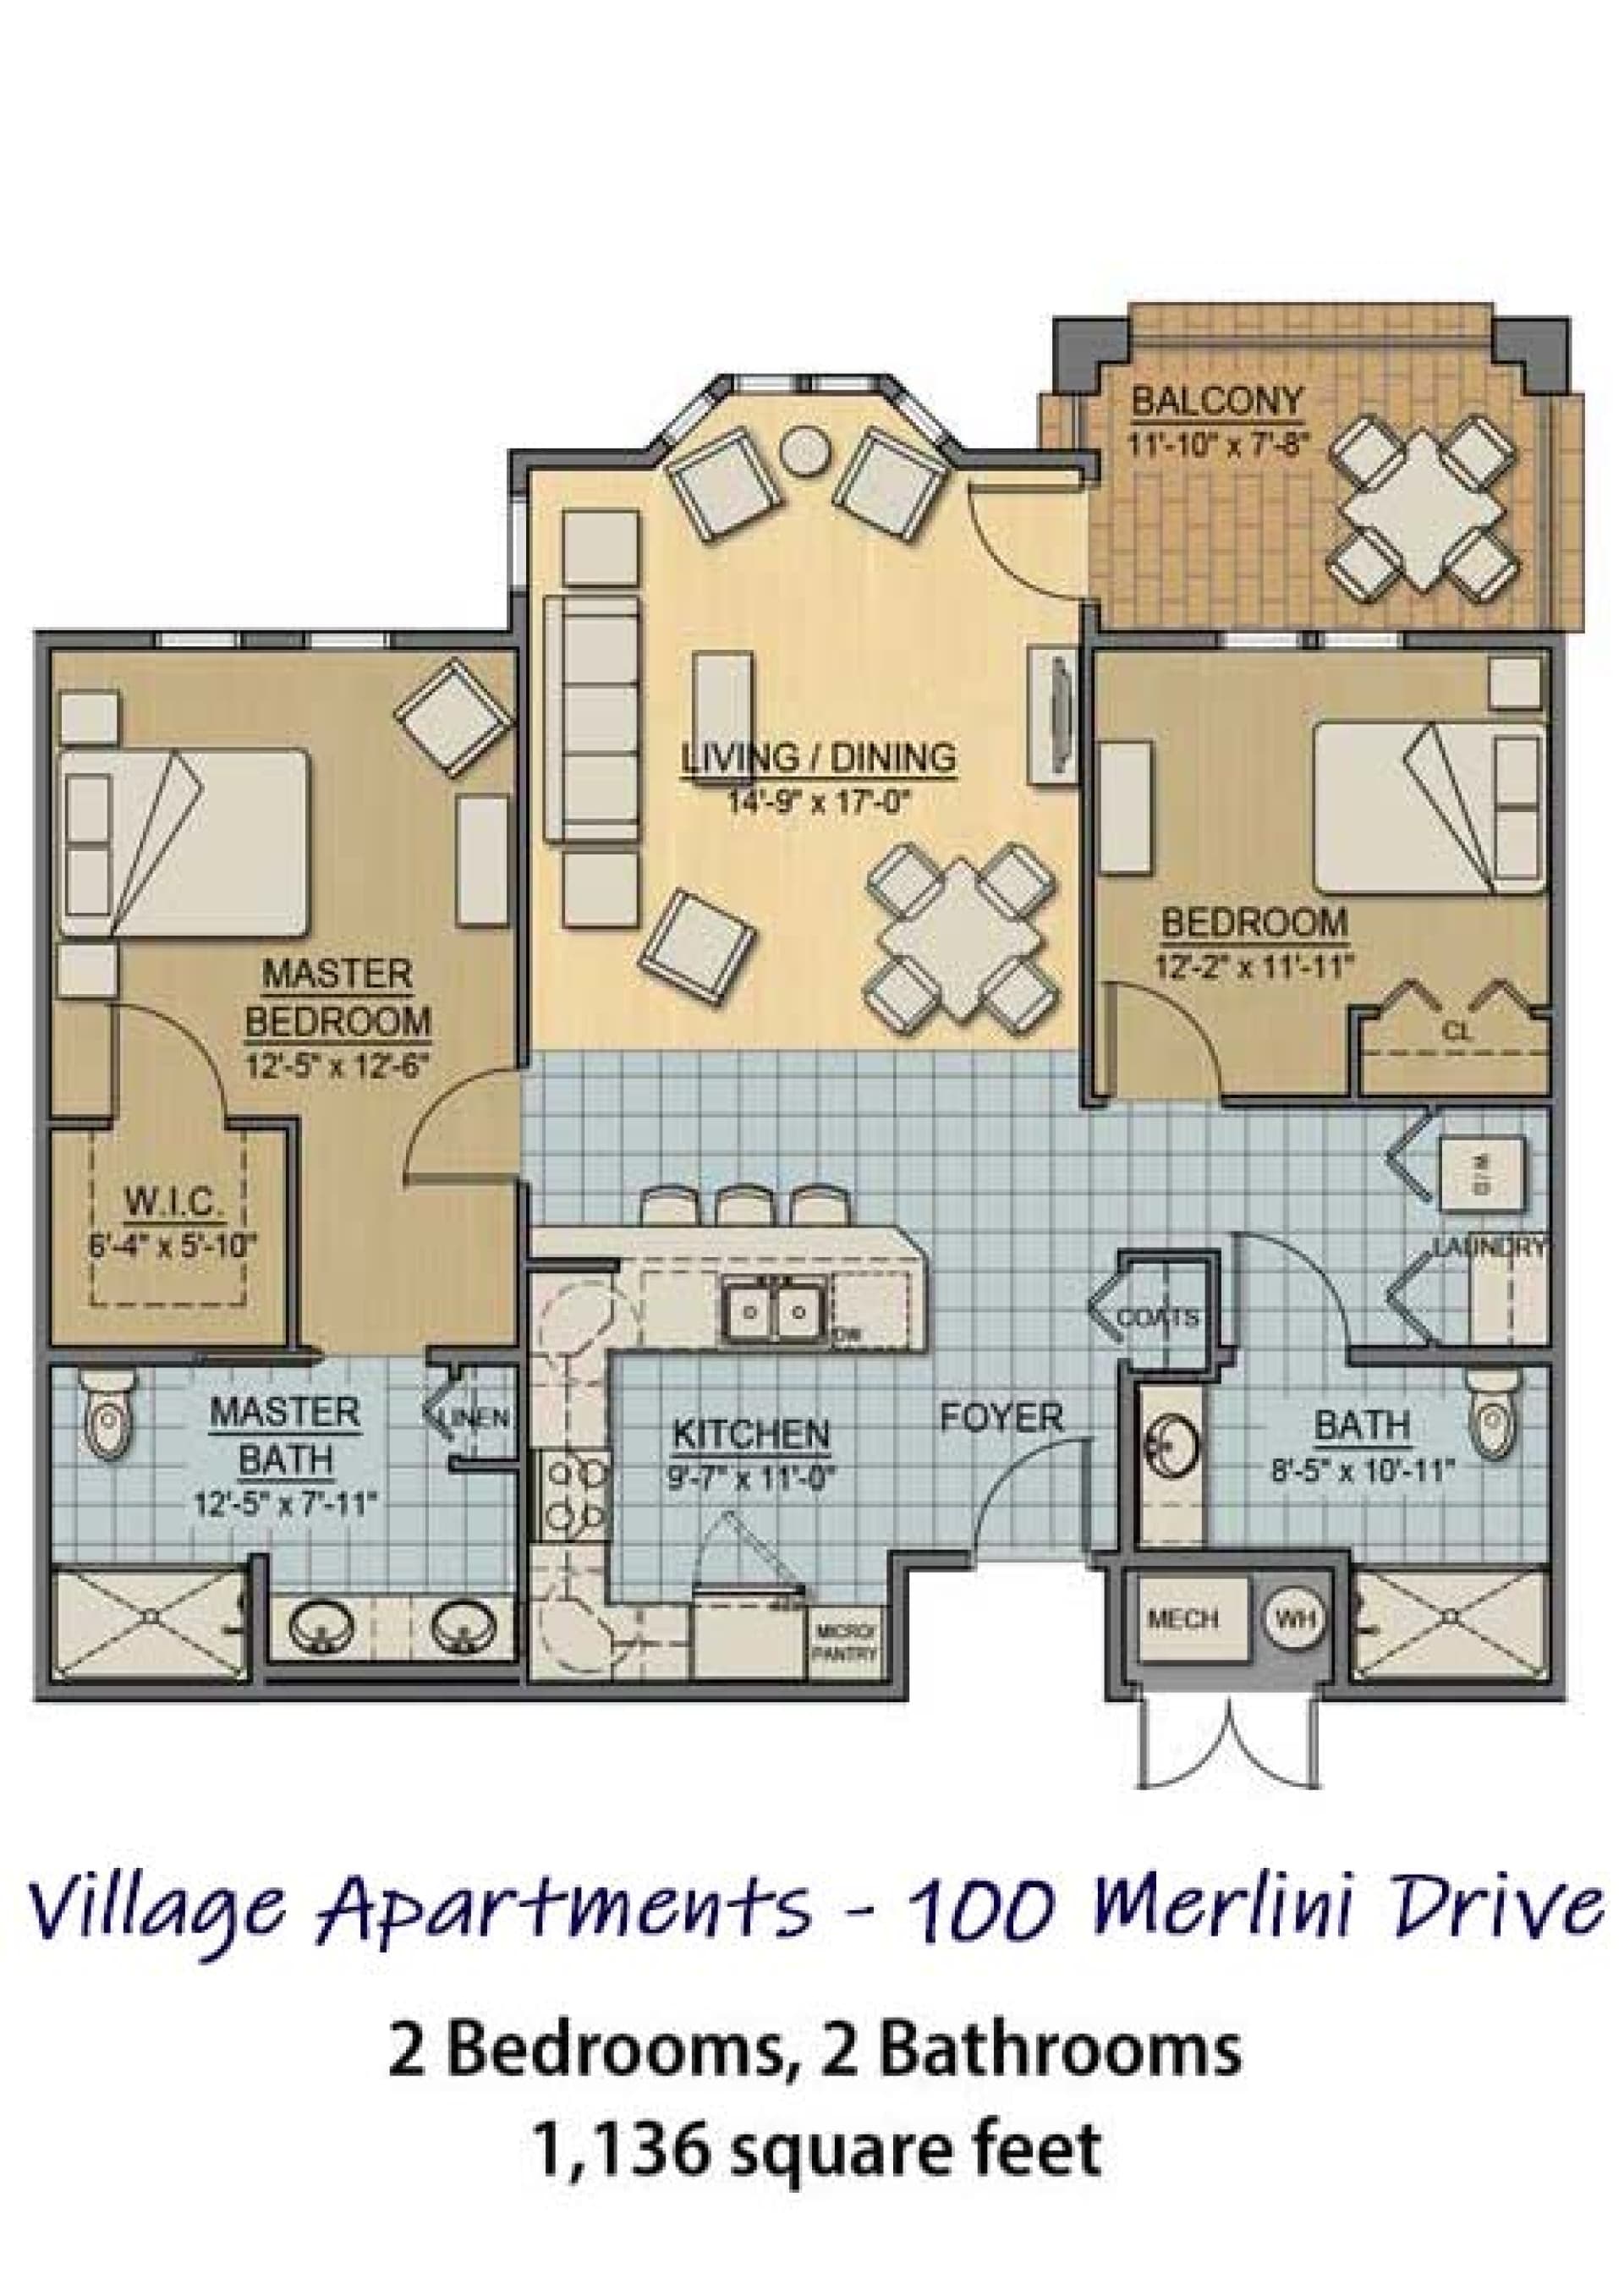 100 Merlini floorplan for 1136sqft apartment with 2BR and 2BA